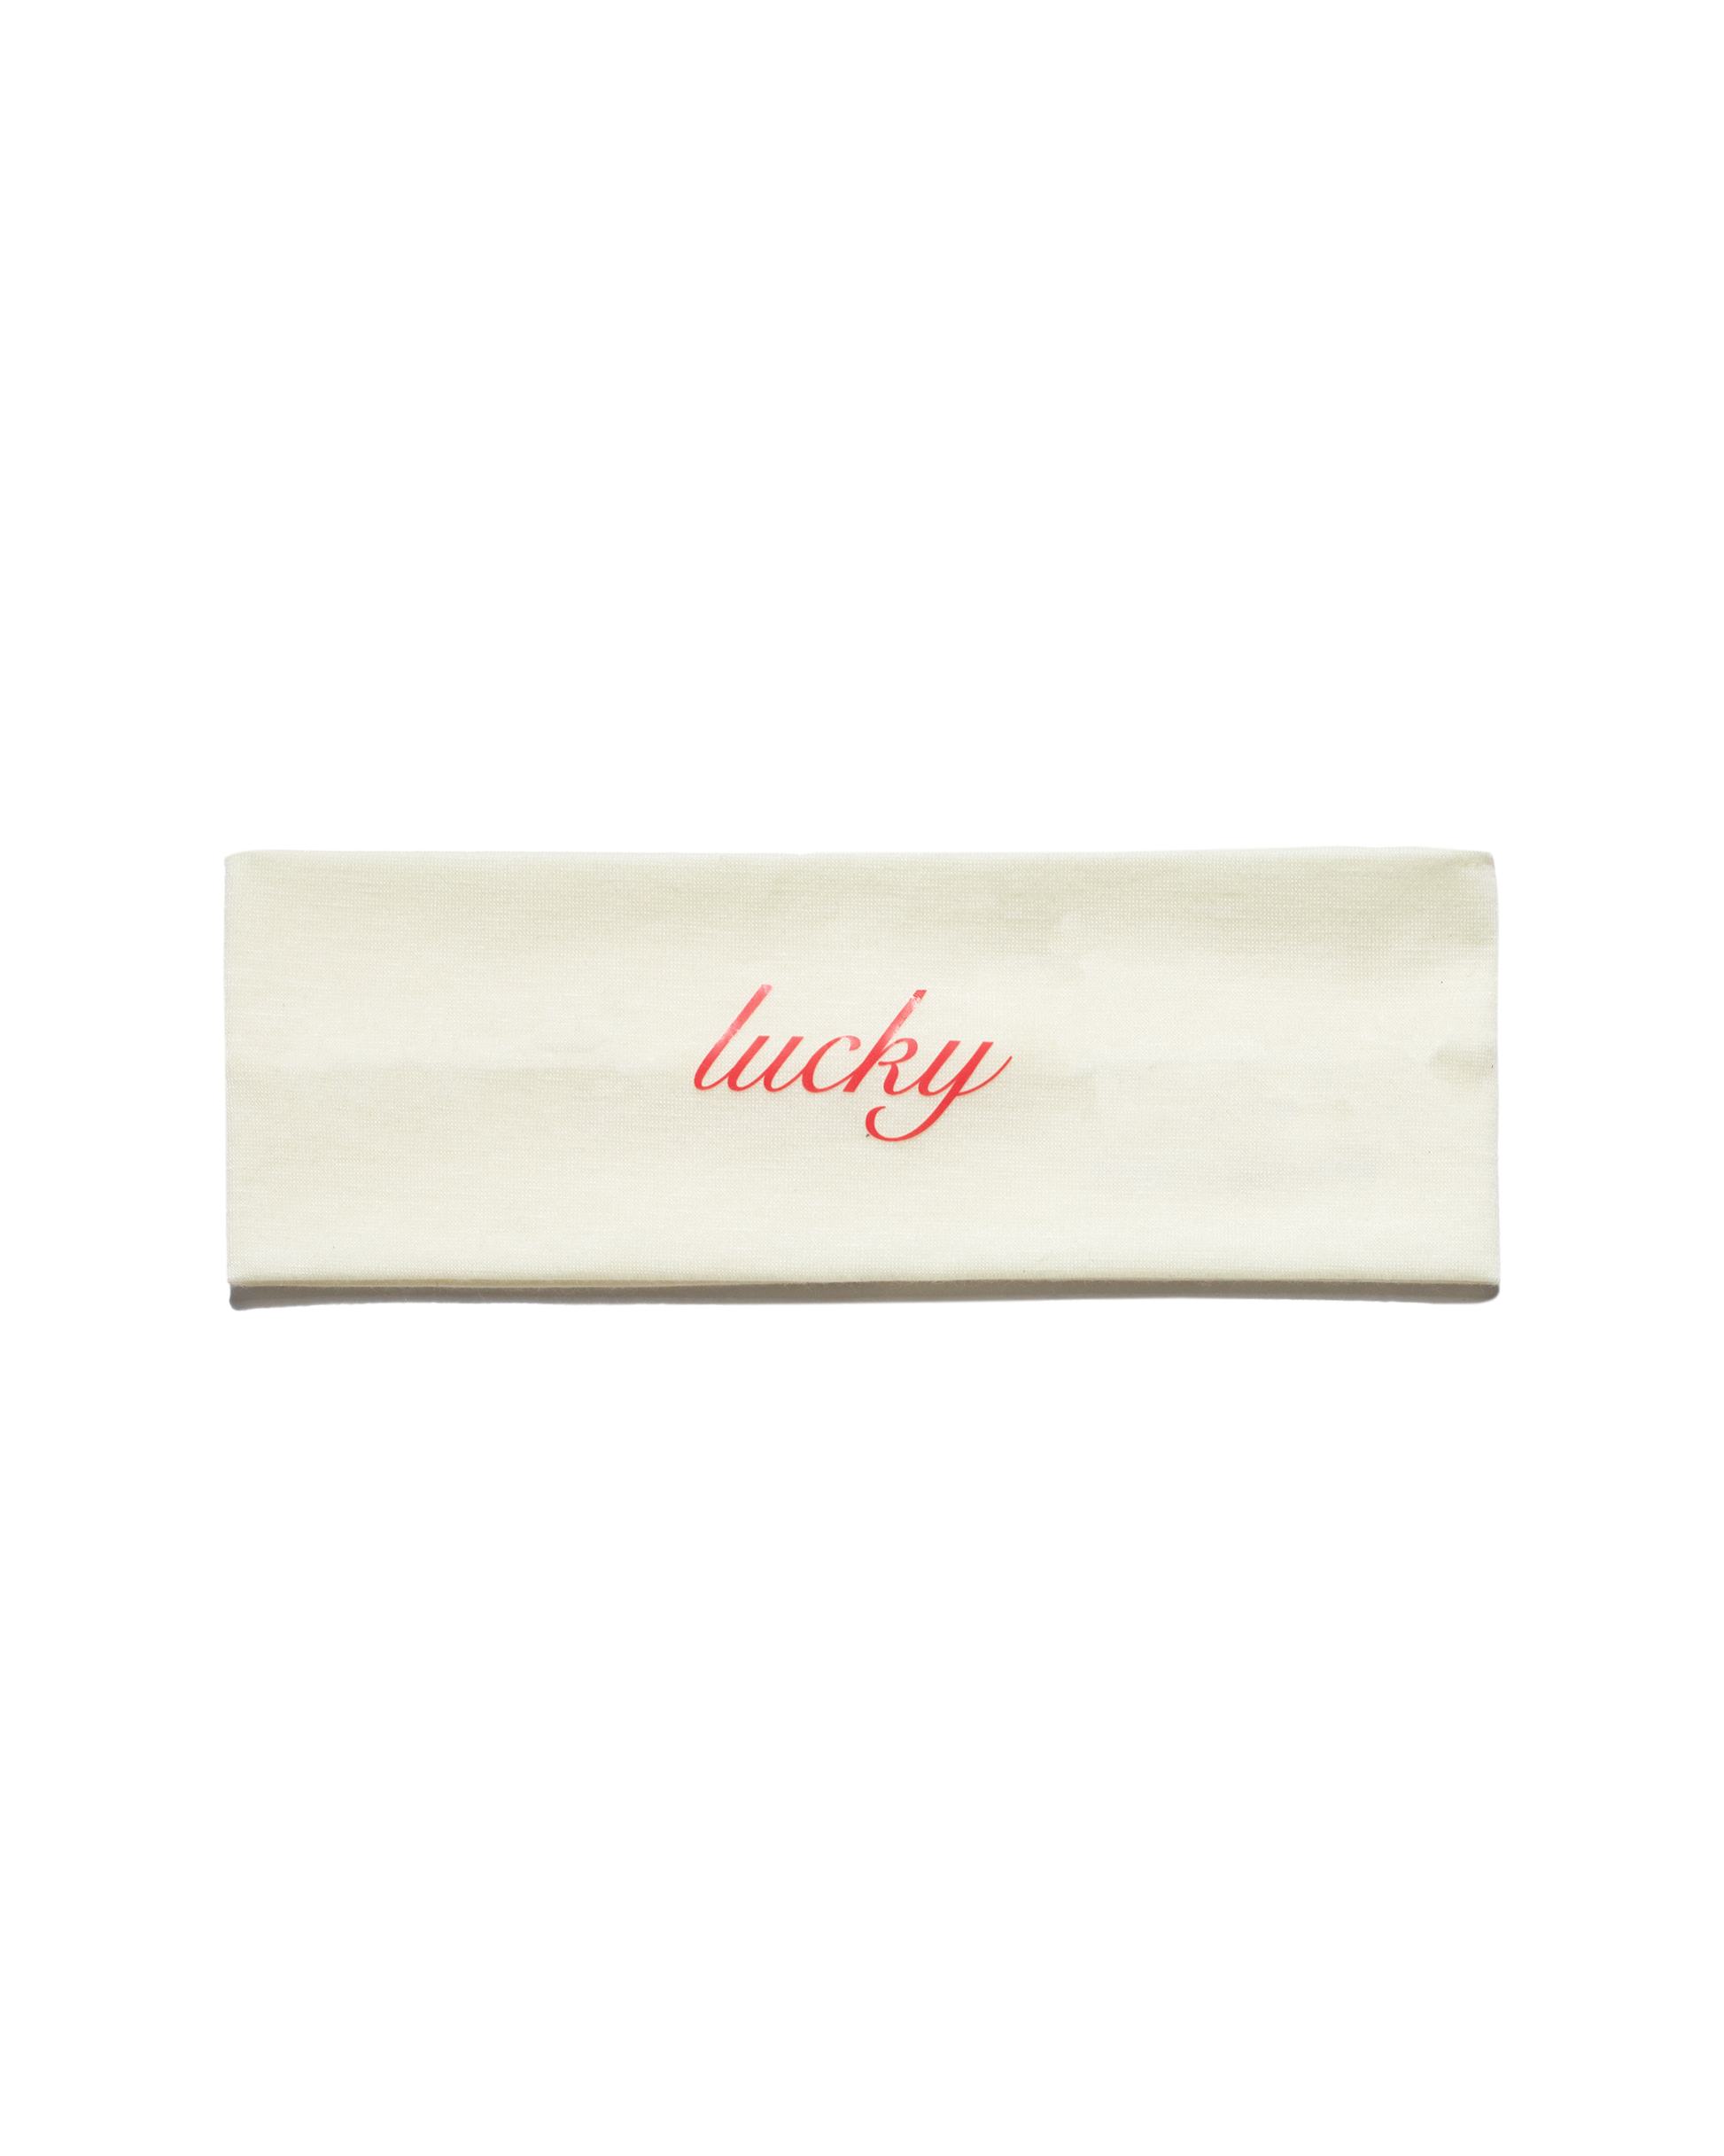 white headband with red linked text 'lucky' | Lucky Girl in Year of the Rabbit | White Headband | Baobei Label